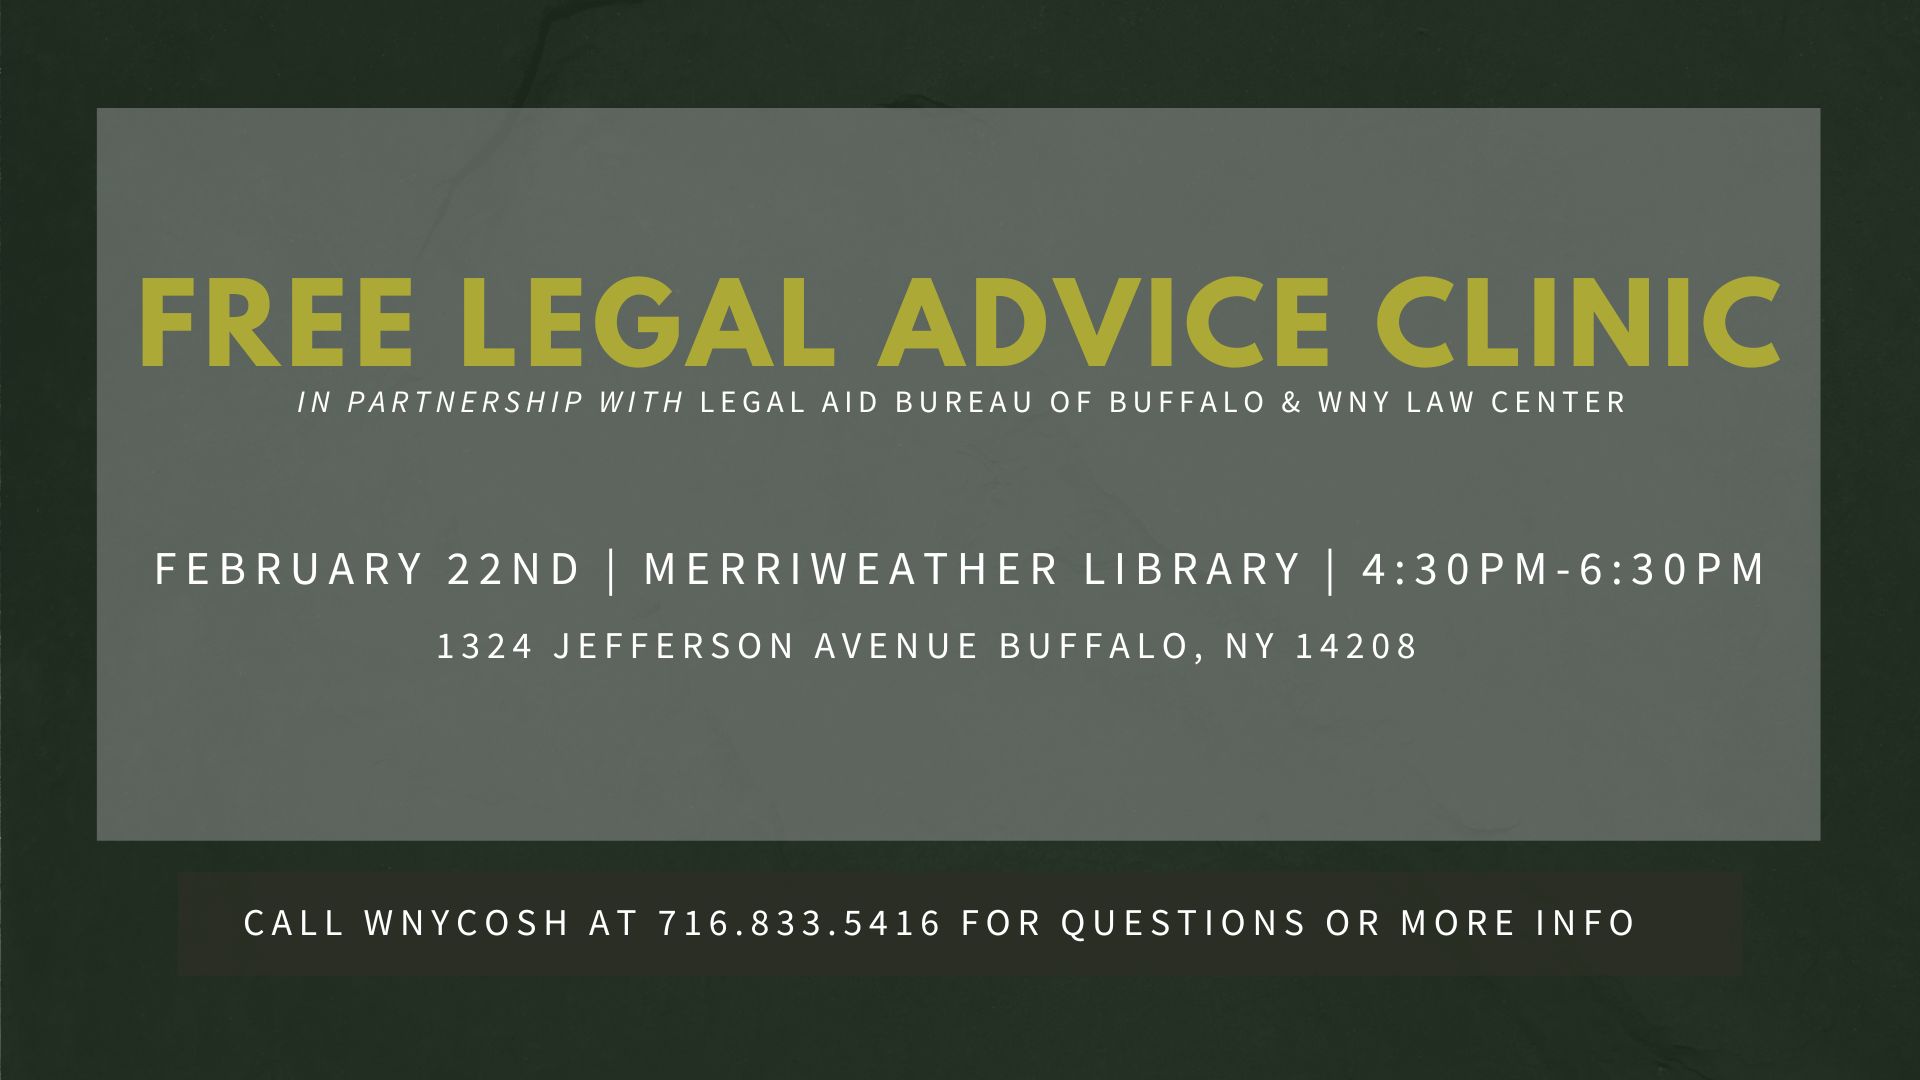 Gray flyer reading "Free Legal Advice Clinic" in partnership with Legal Aid Bureau of Buffalo and Western New York Law Center with the time, date, and location of the clinic.